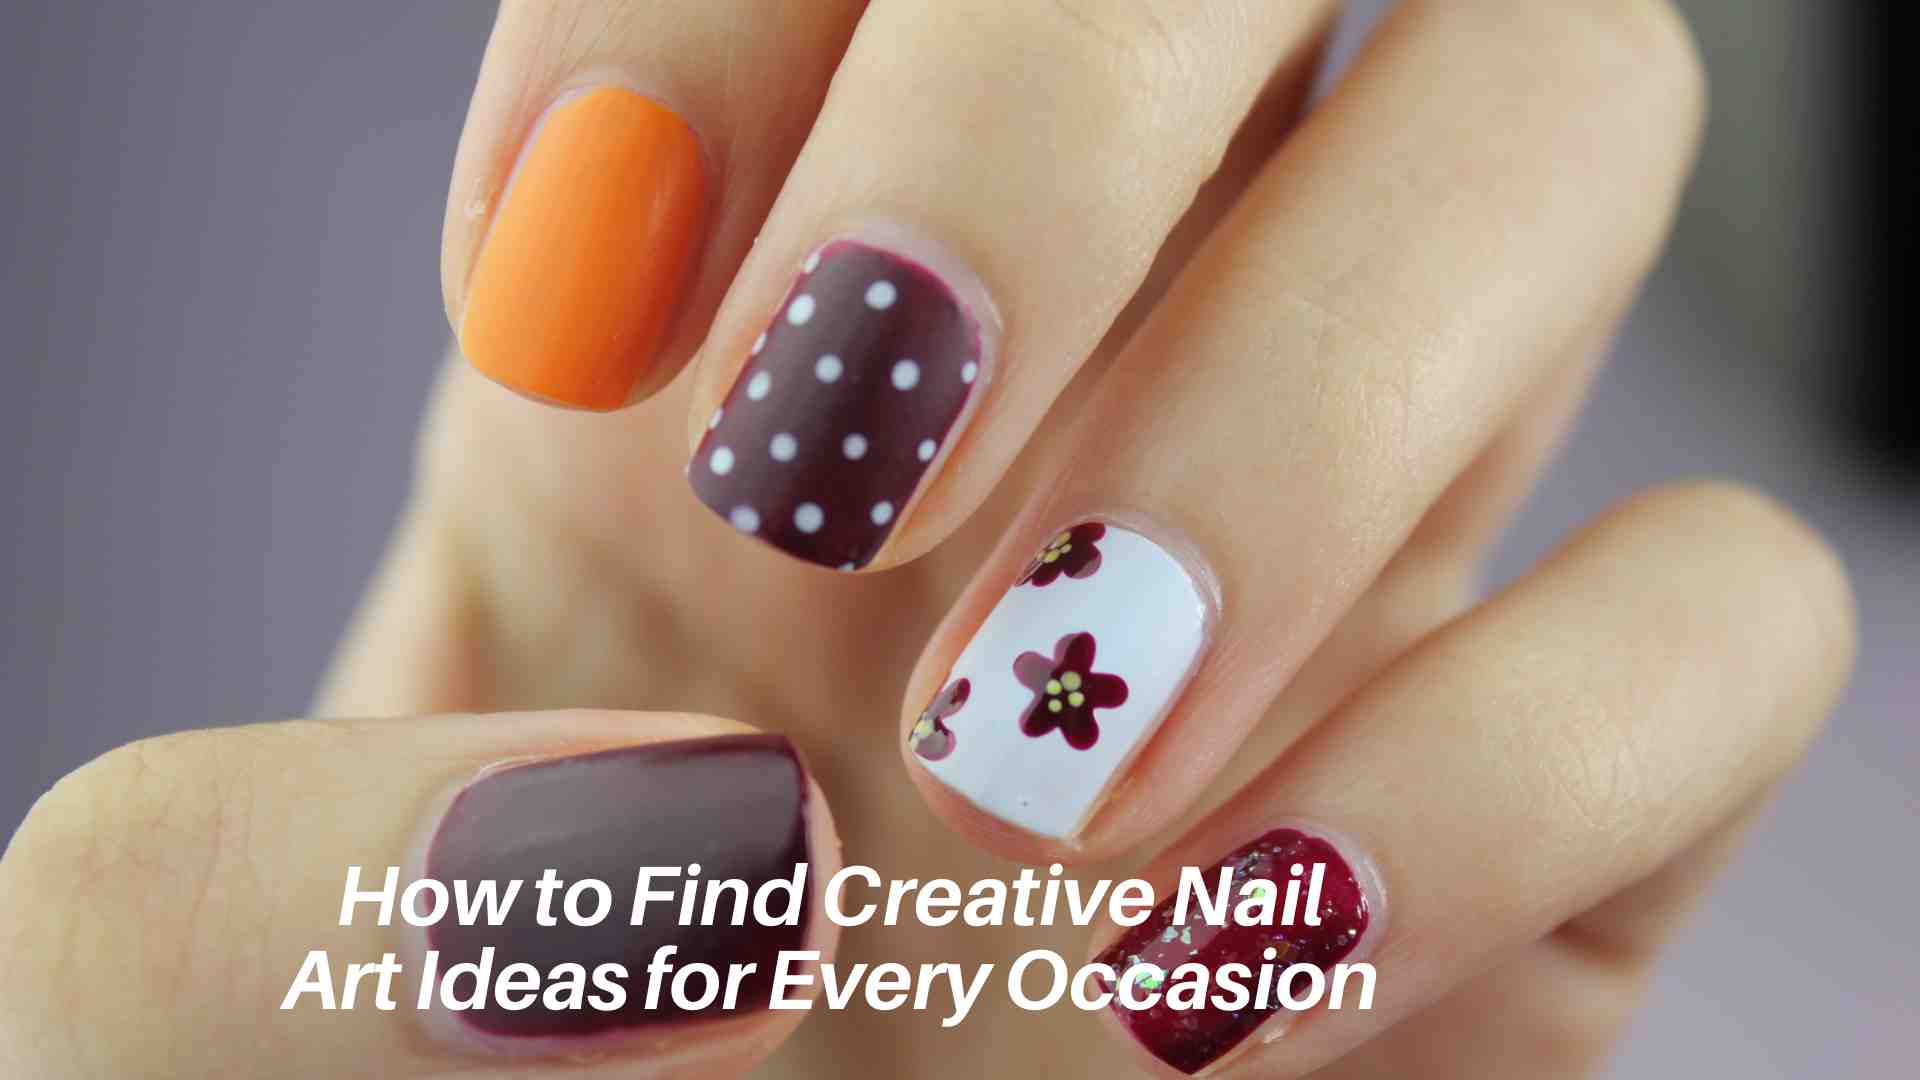 How to Find Creative Nail Art Ideas for Every Occasion